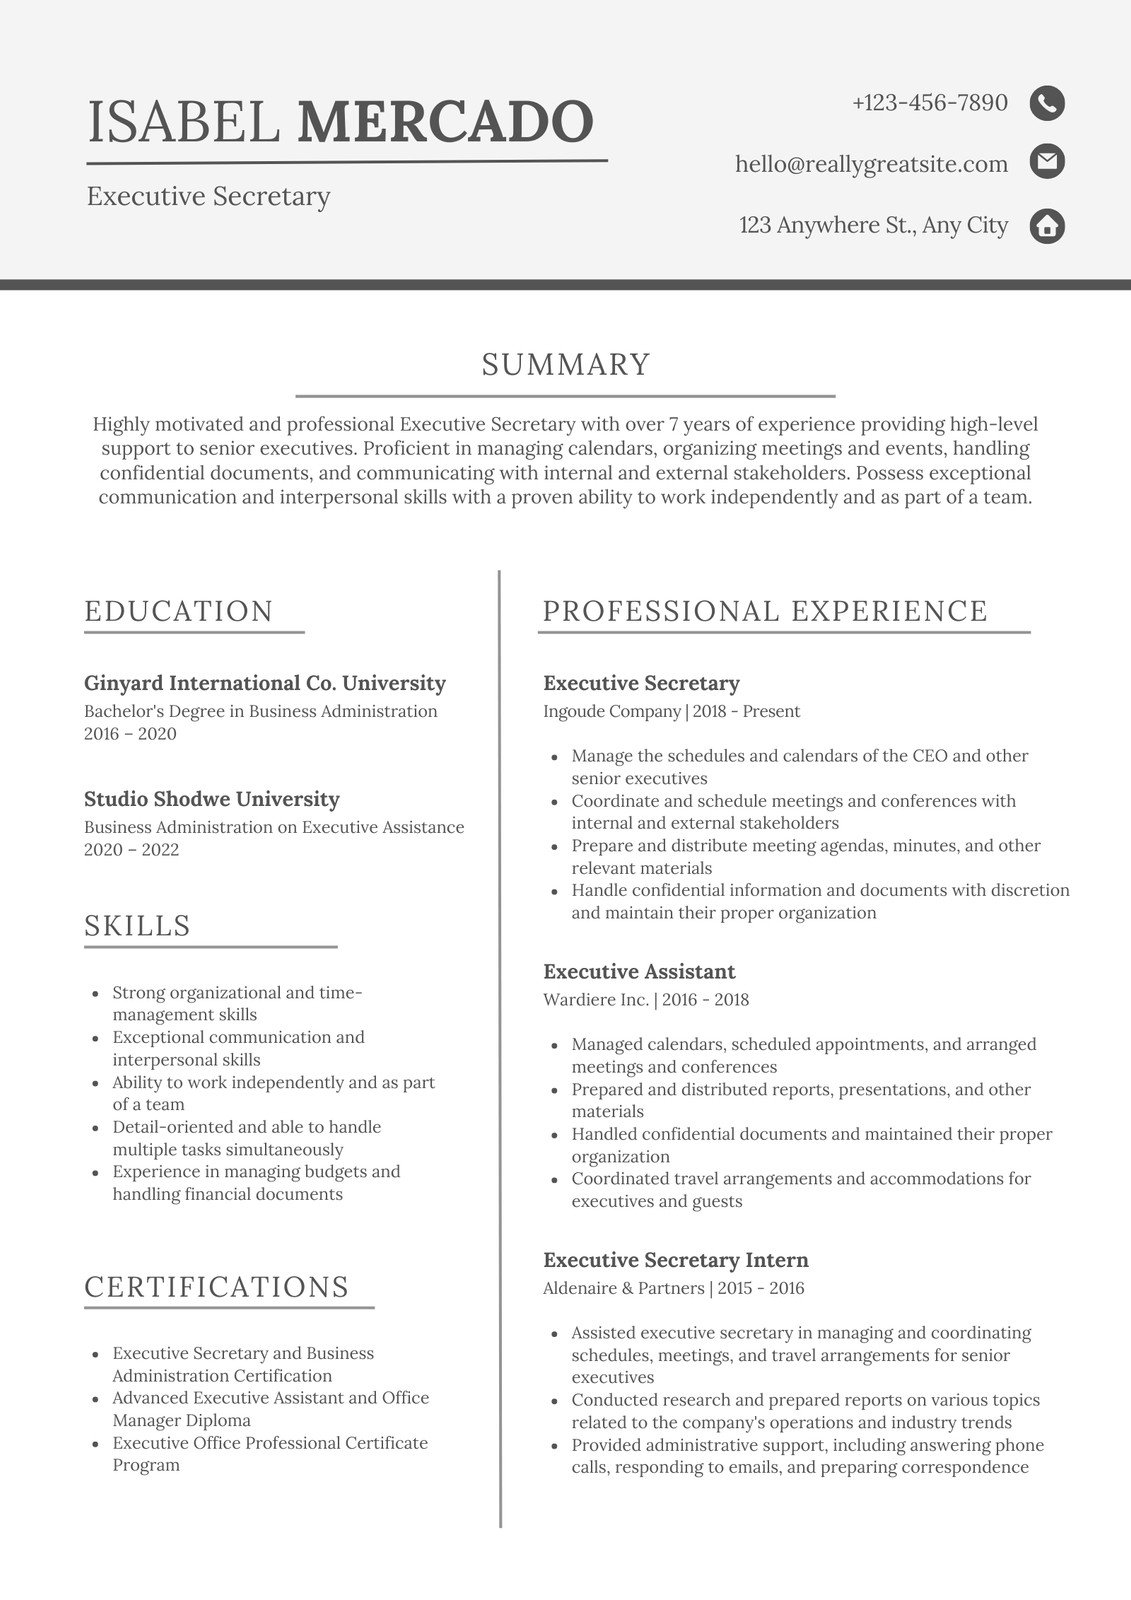 Traditional Resume Templates  Black & White Resume Templates for